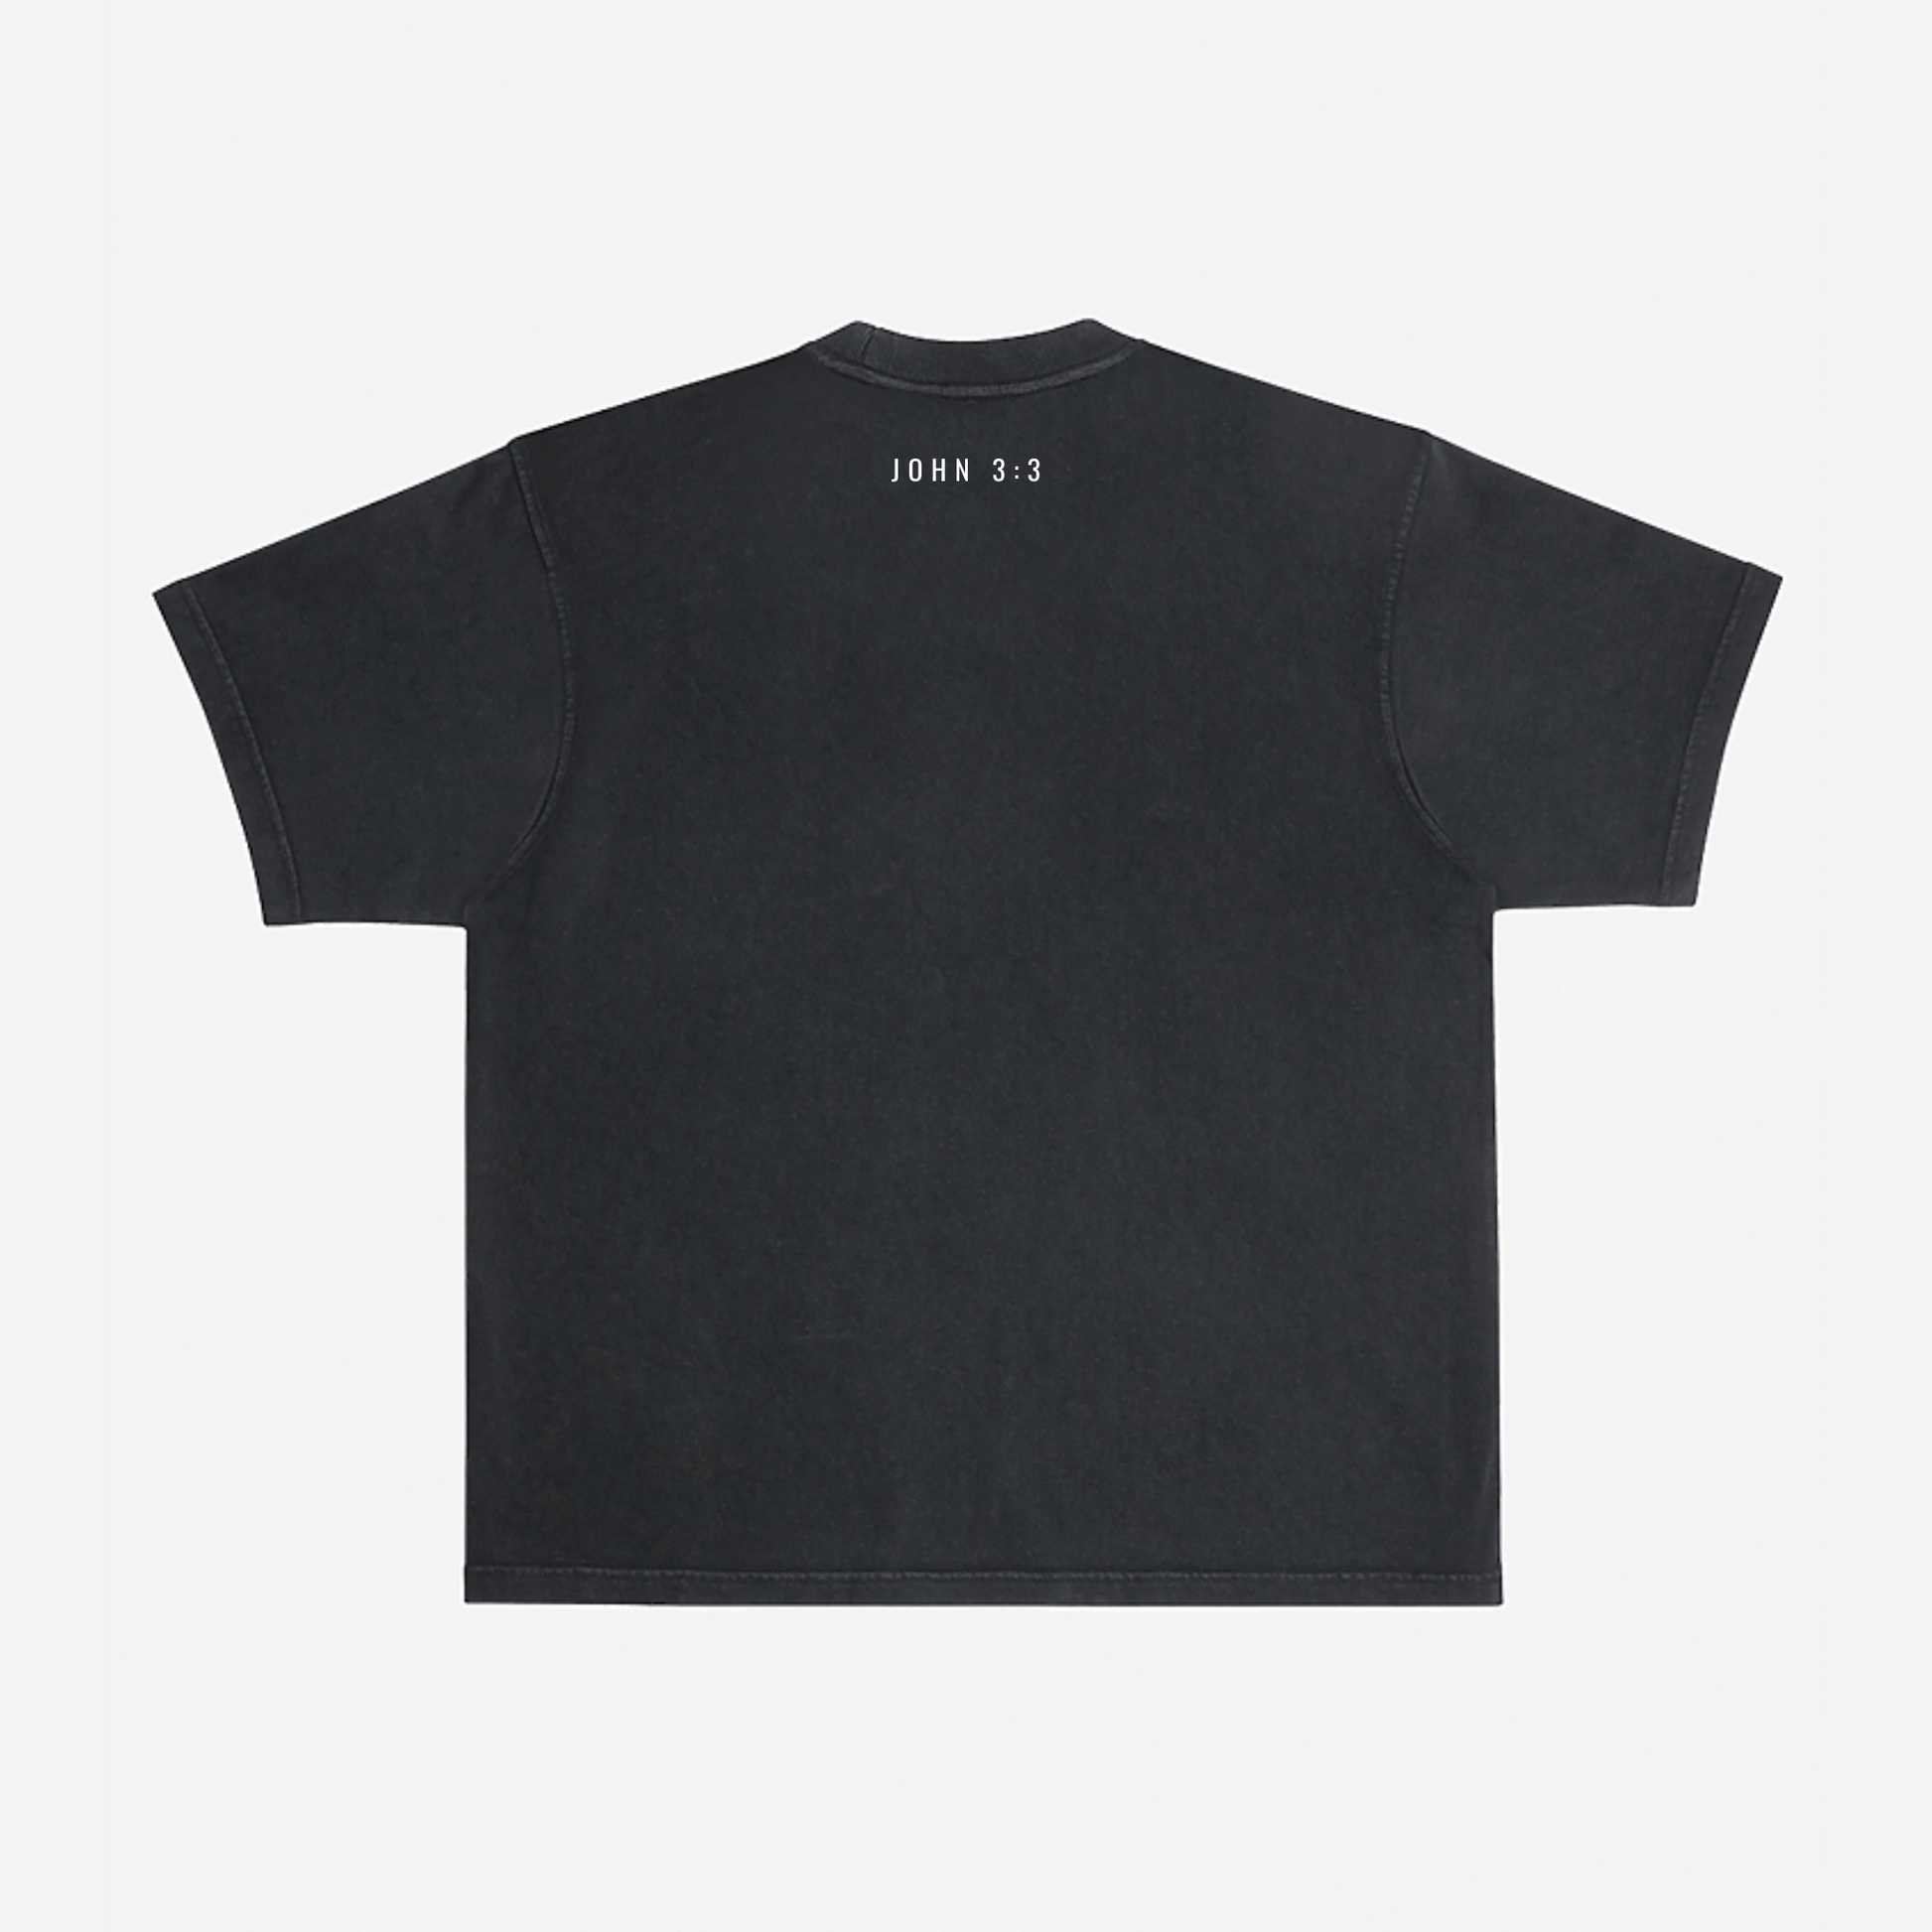 BORN AGAIN OVERSIZED TEE (WASHED BLACK) - effortless essentials co.